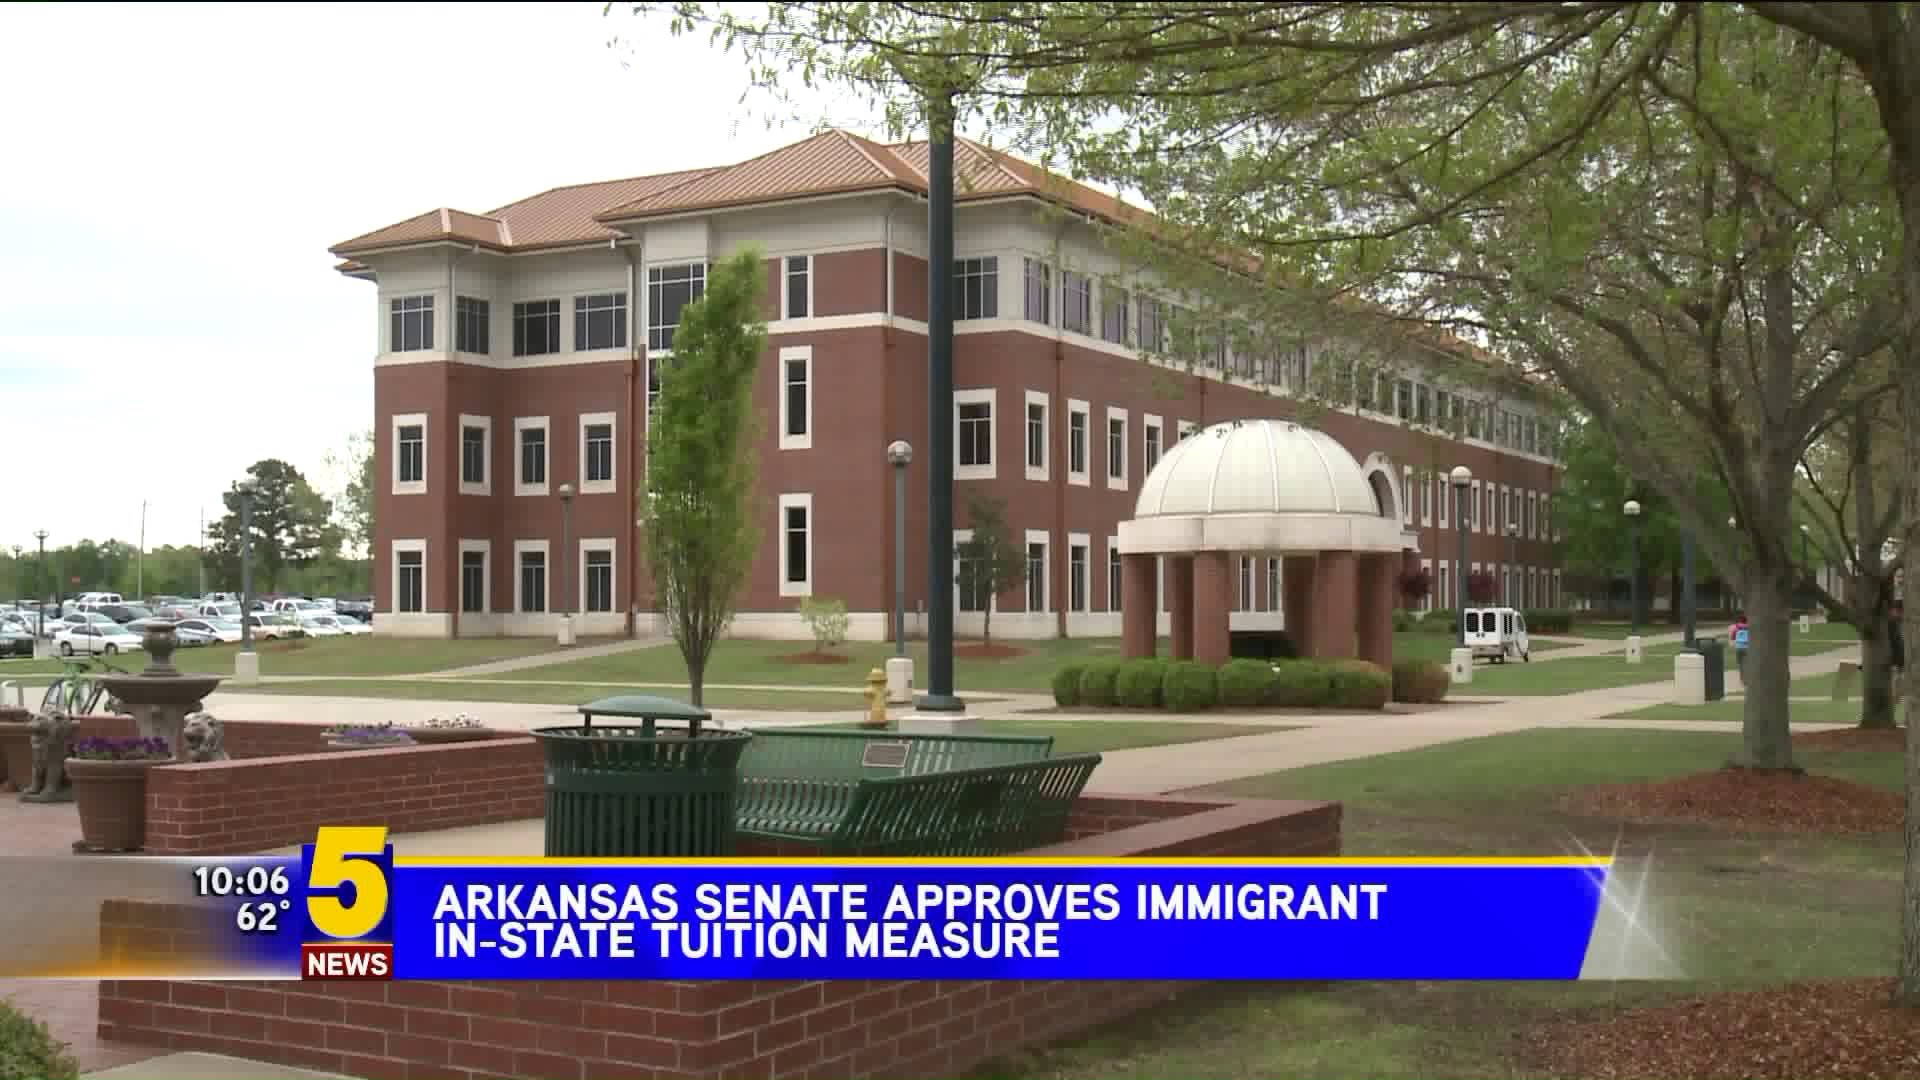 Arkansas Senate Approves Immigrant In-State Tuition Measures